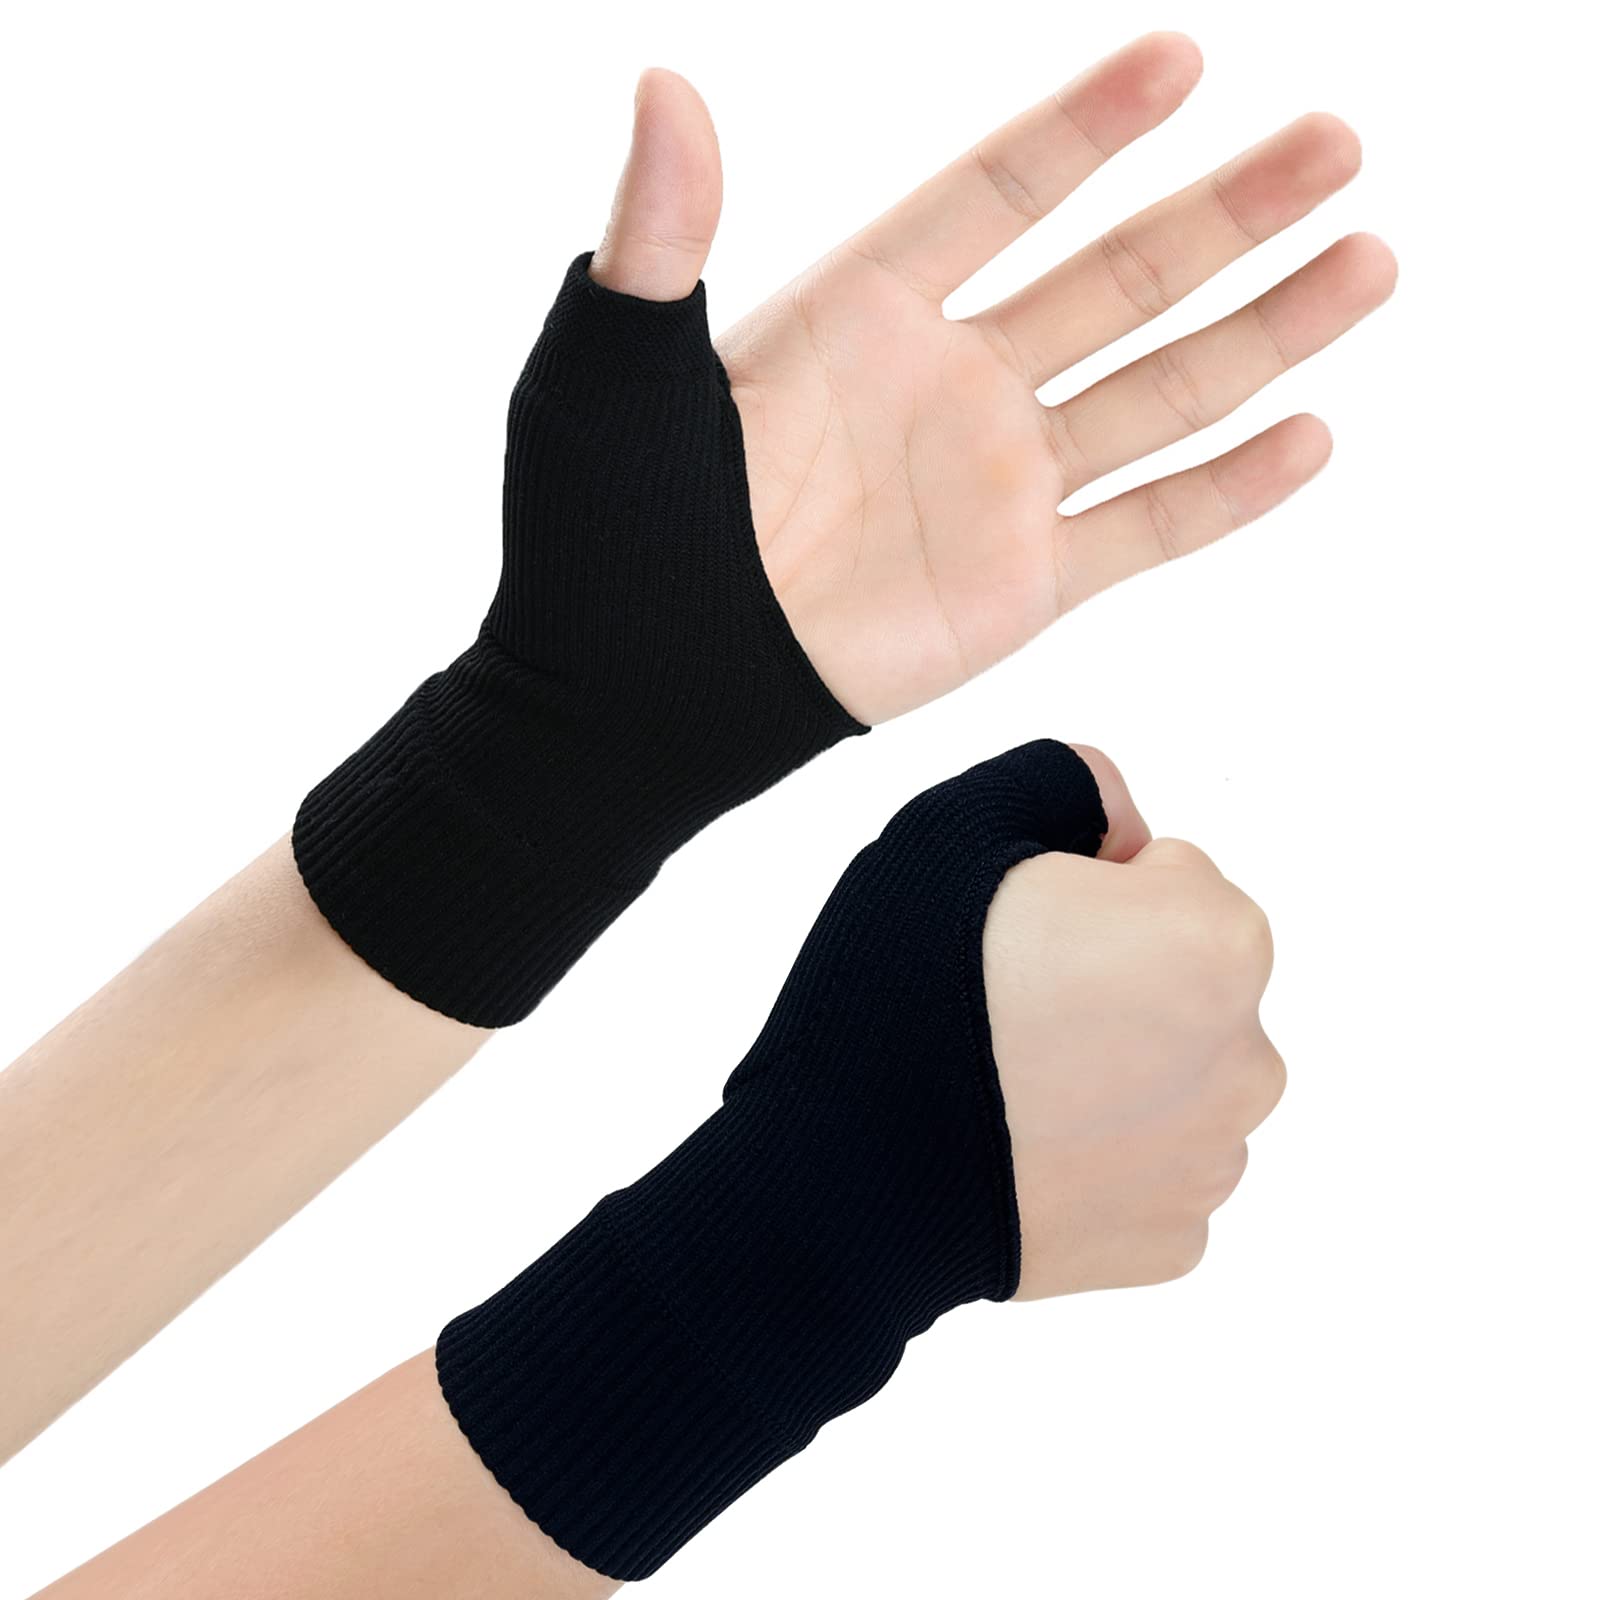 Wrist Thumb Support Compression Gloves (1 Pair) Breathable Wrist